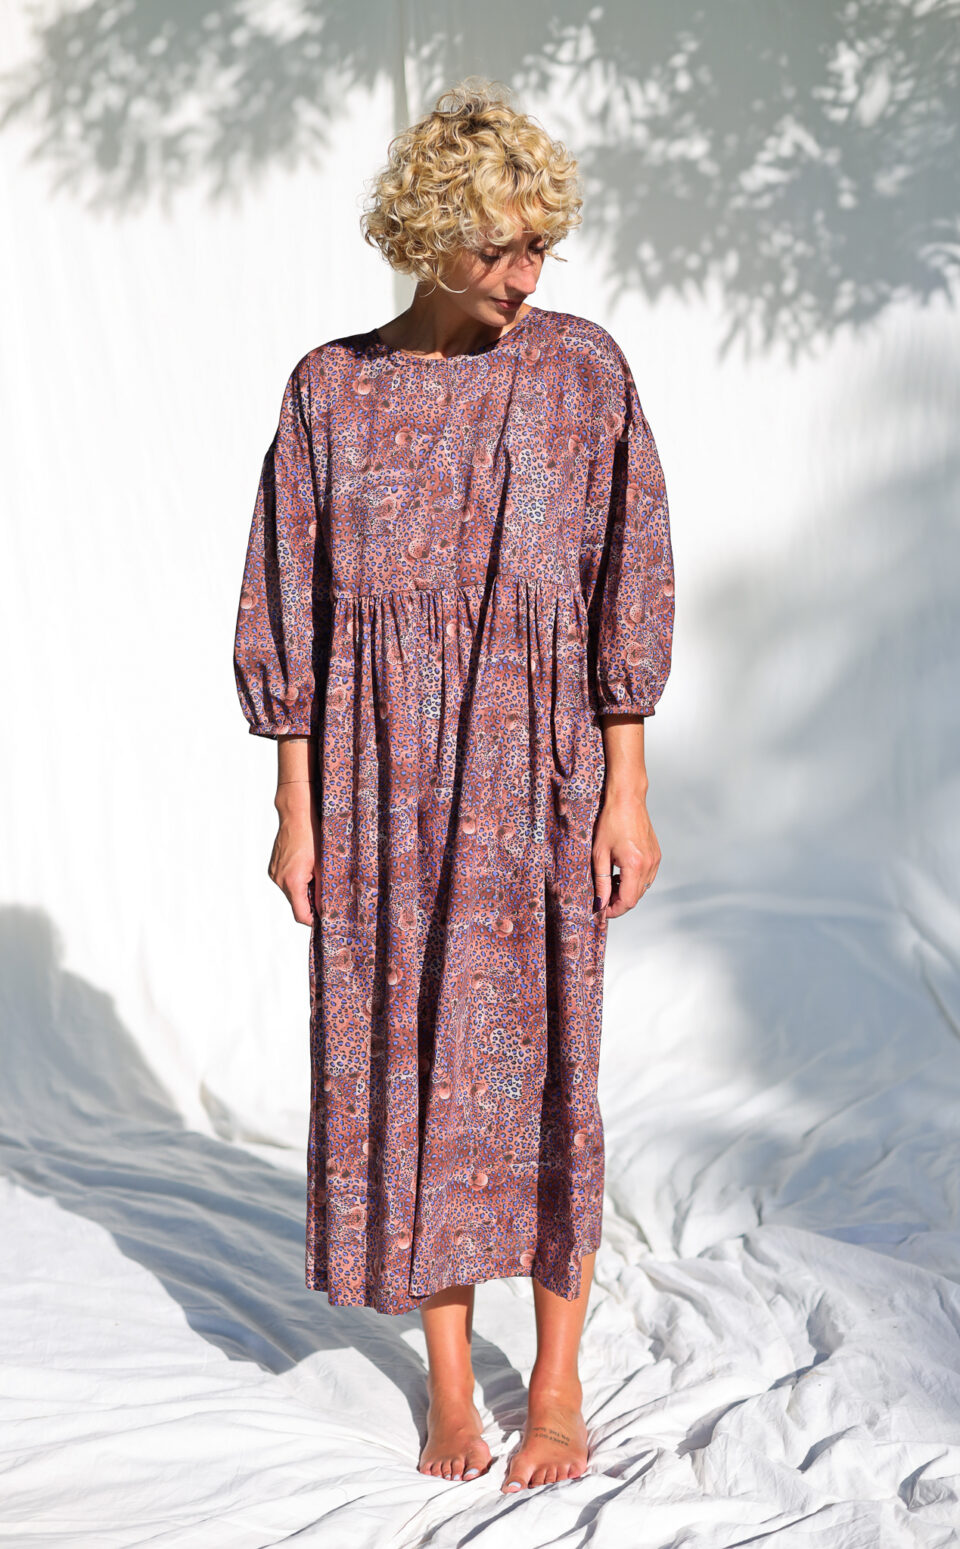 Leopard print puff sleeves silky cotton dress | Dress | Sustainable clothing | OffOn clothing